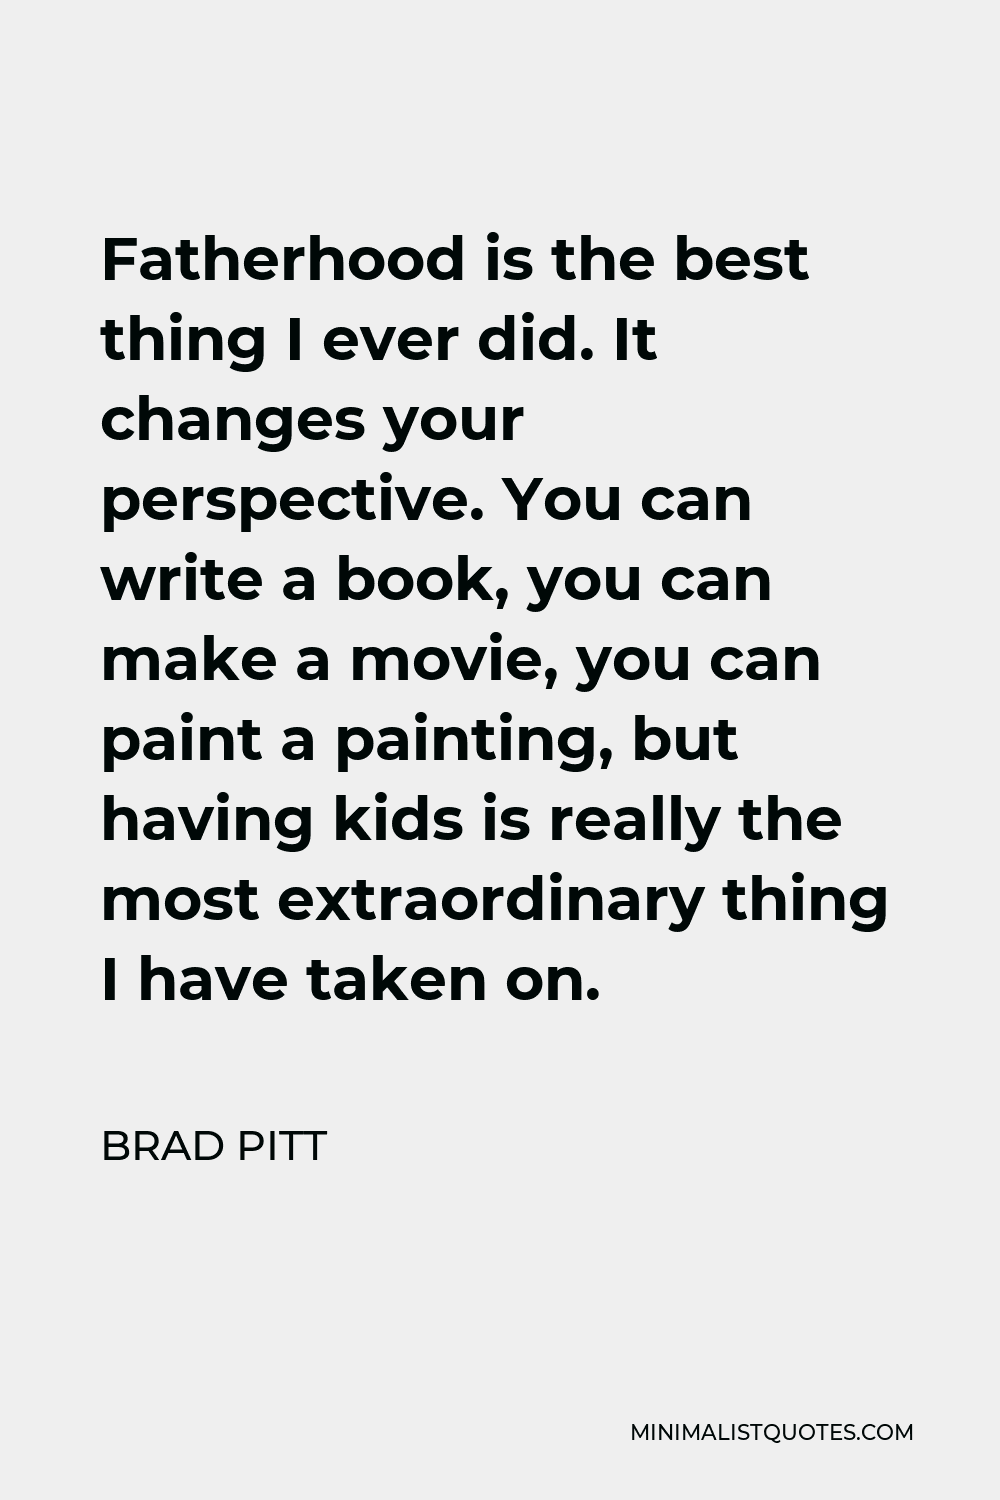 Brad Pitt Quote - Fatherhood is the best thing I ever did. It changes your perspective. You can write a book, you can make a movie, you can paint a painting, but having kids is really the most extraordinary thing I have taken on.